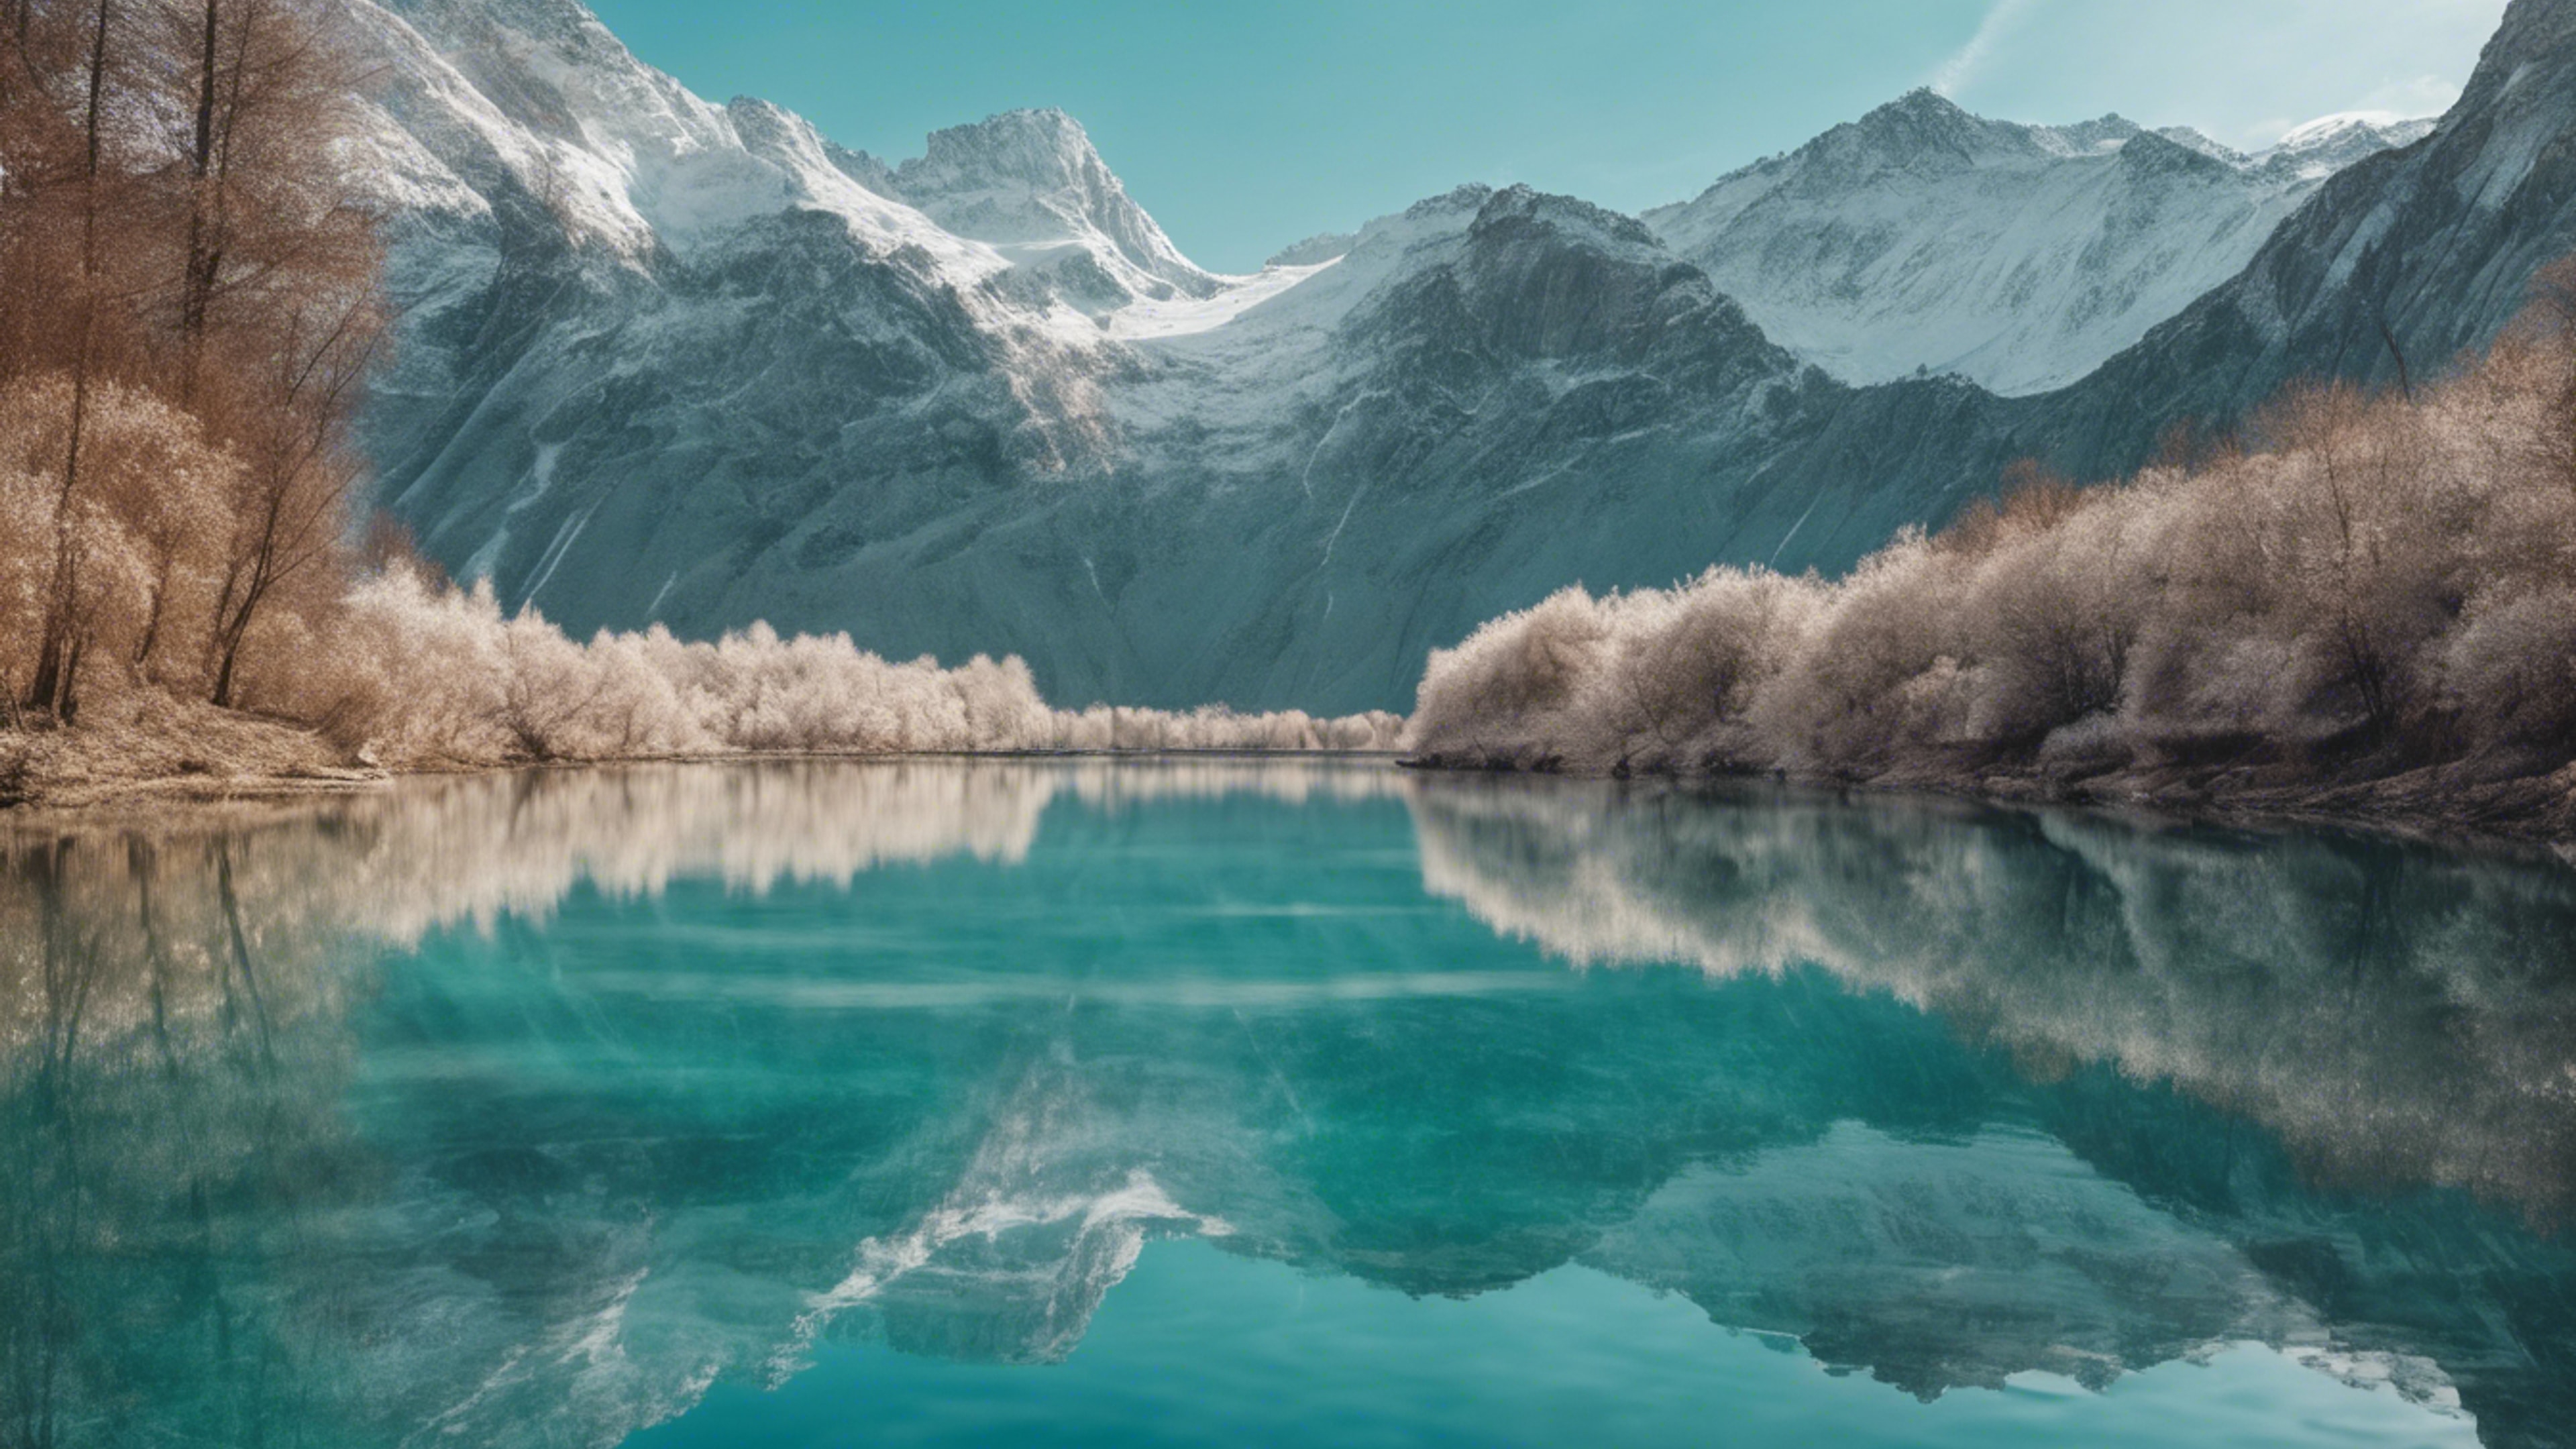 A crystal clear turquoise lake with a picturesque snow-capped mountain in the backdrop during a calm and serene morning.壁紙[b81ebafc748d4ee58fc1]